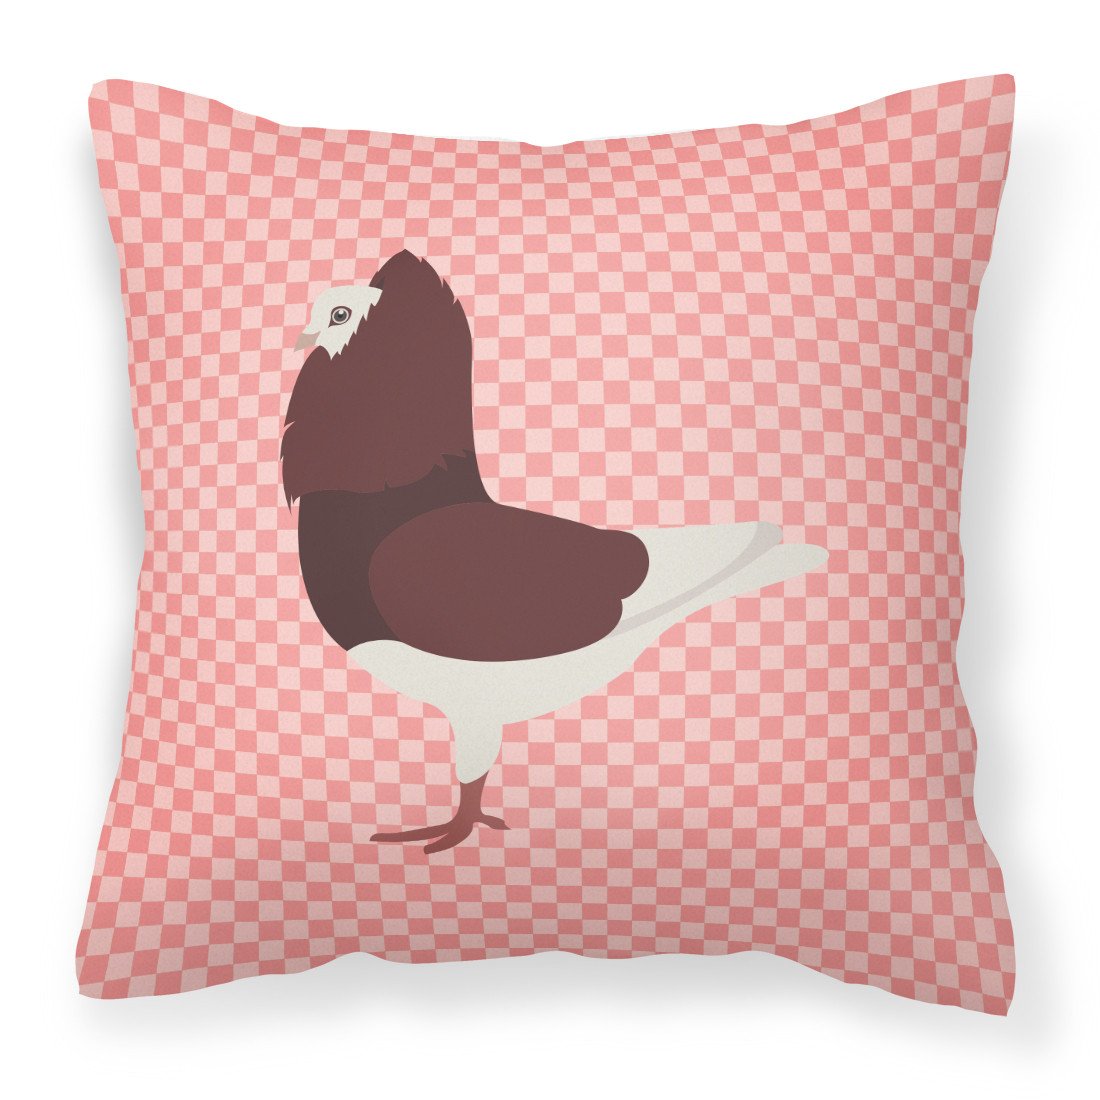 Capuchin Red Pigeon Pink Check Fabric Decorative Pillow BB7948PW1818 by Caroline's Treasures